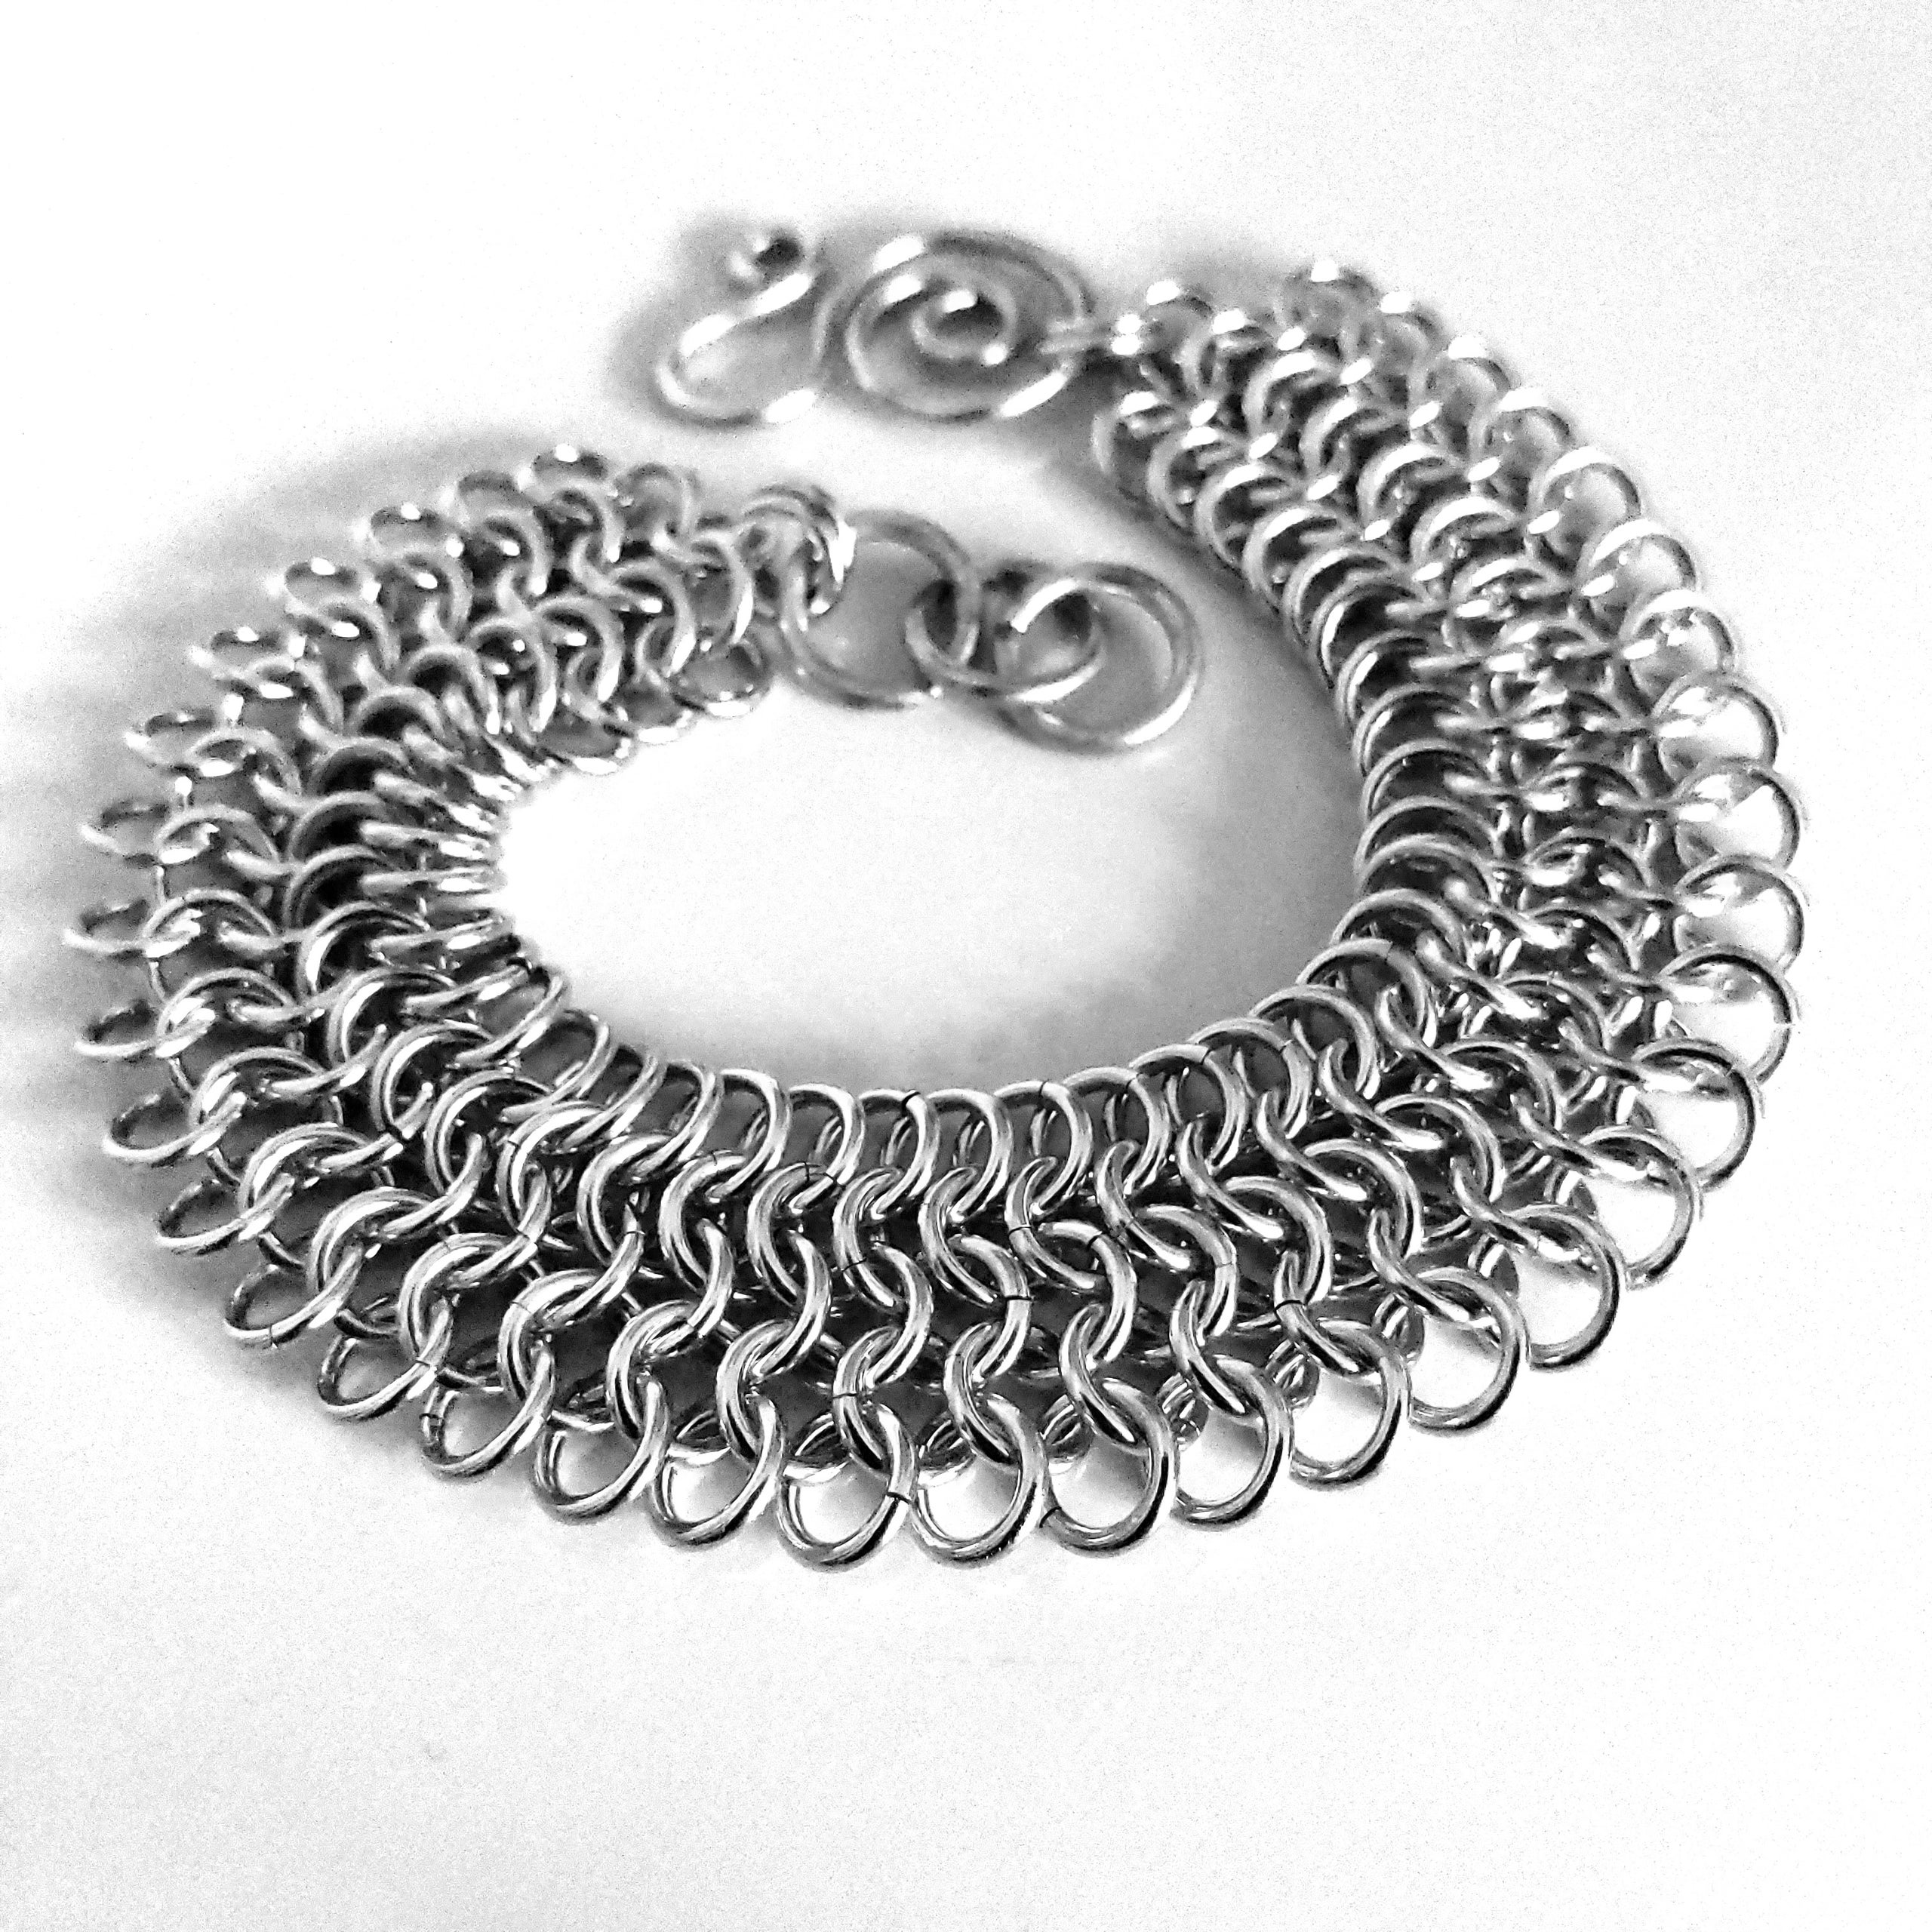 Small wide sterling silver link braclet - Paris